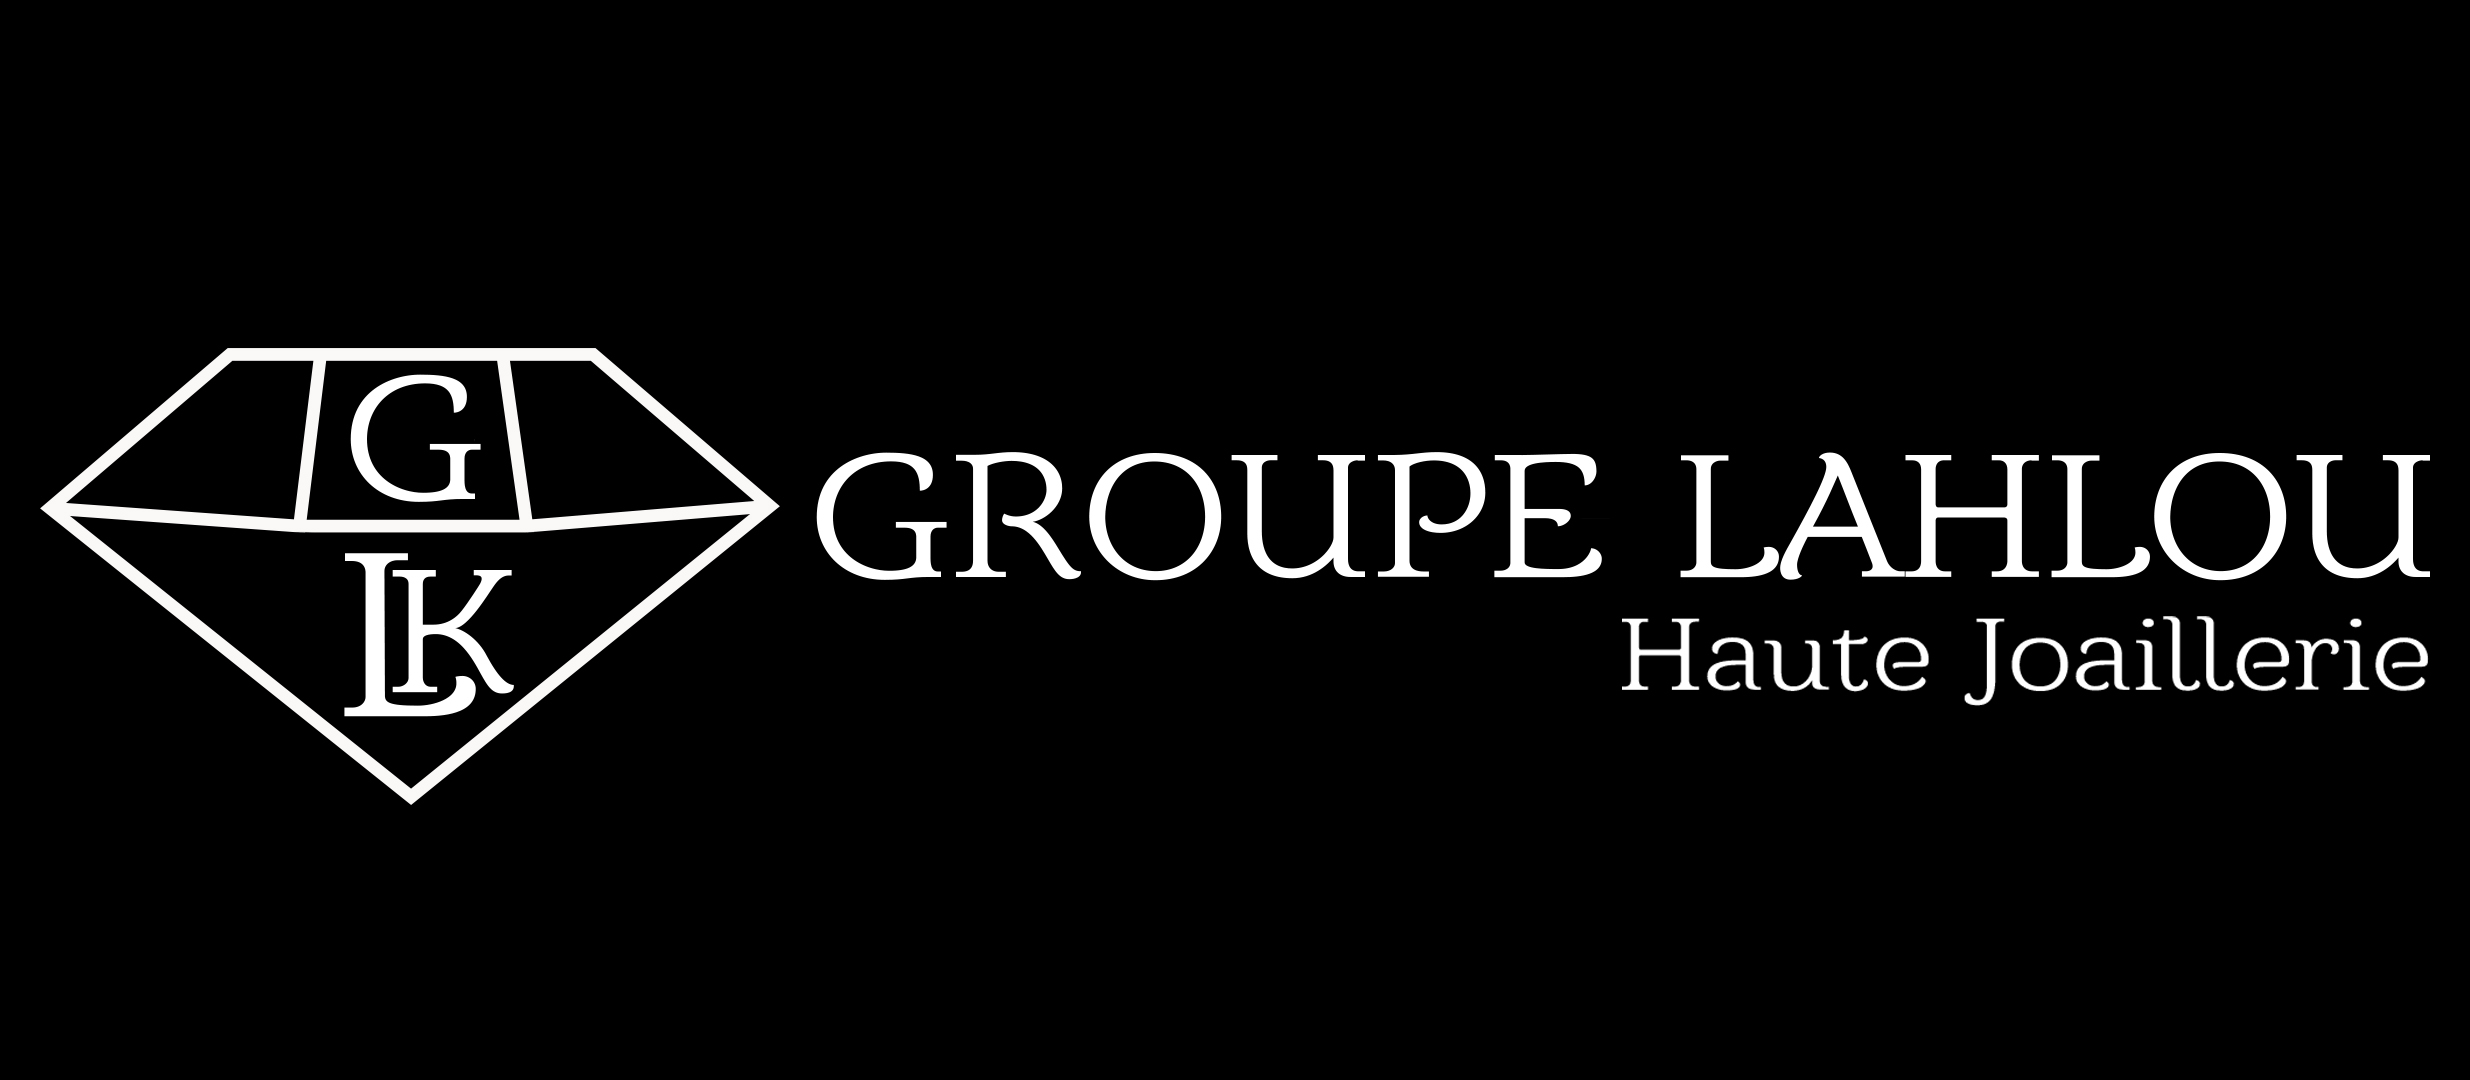 Groupe Lahlou